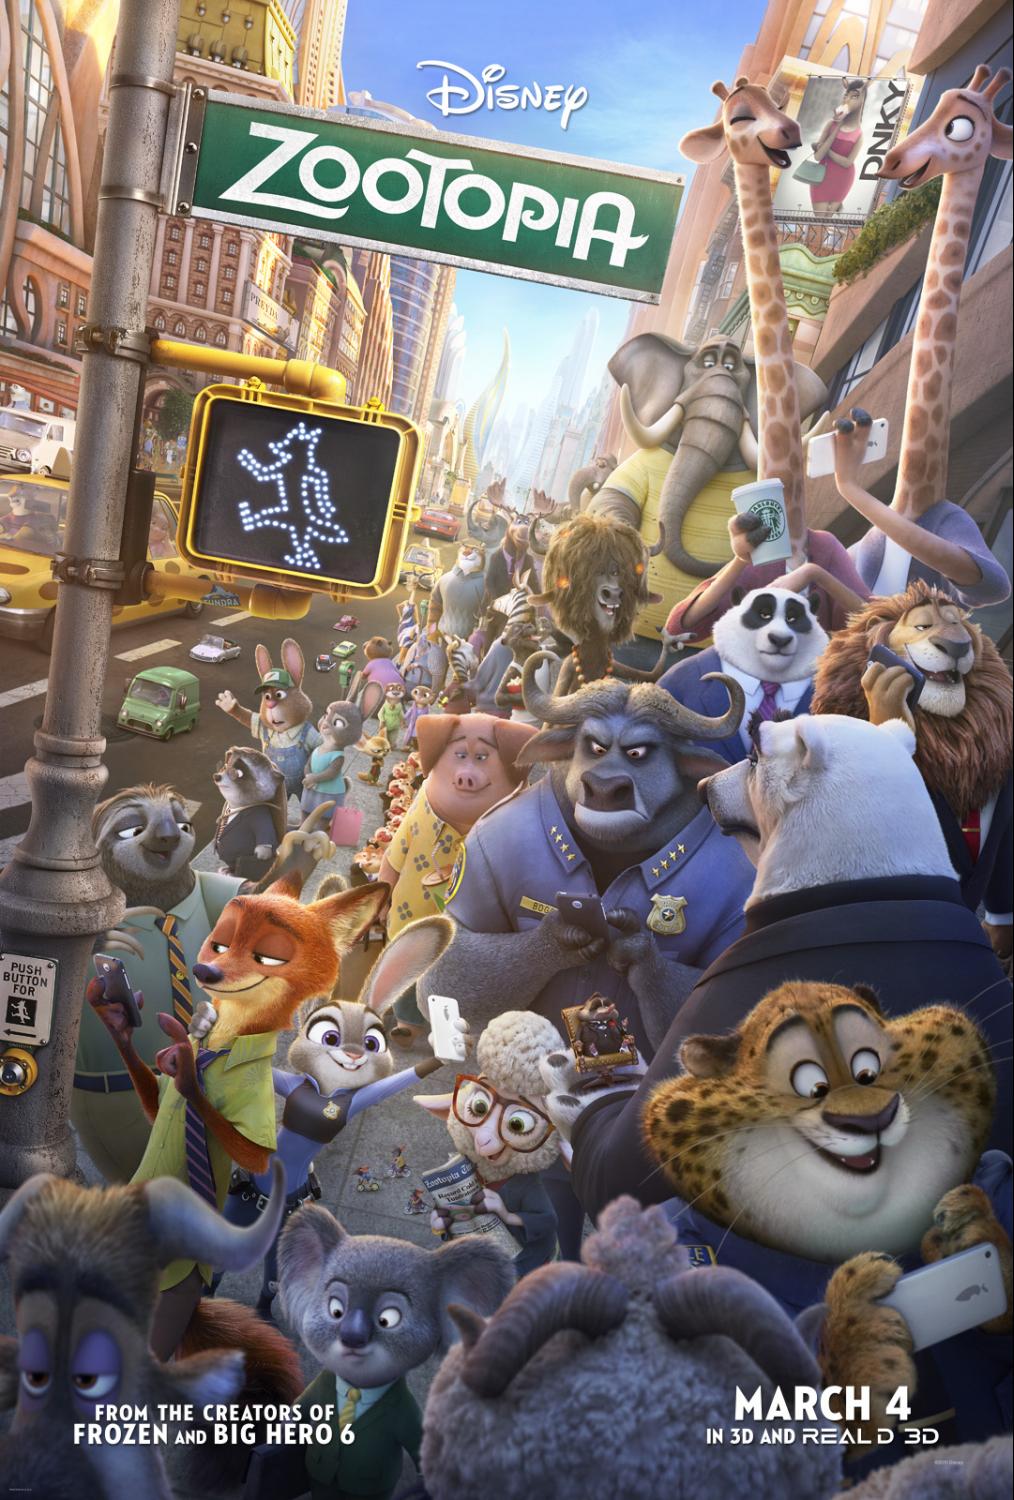 “Zootopia” opens in theaters on March 4, 2016